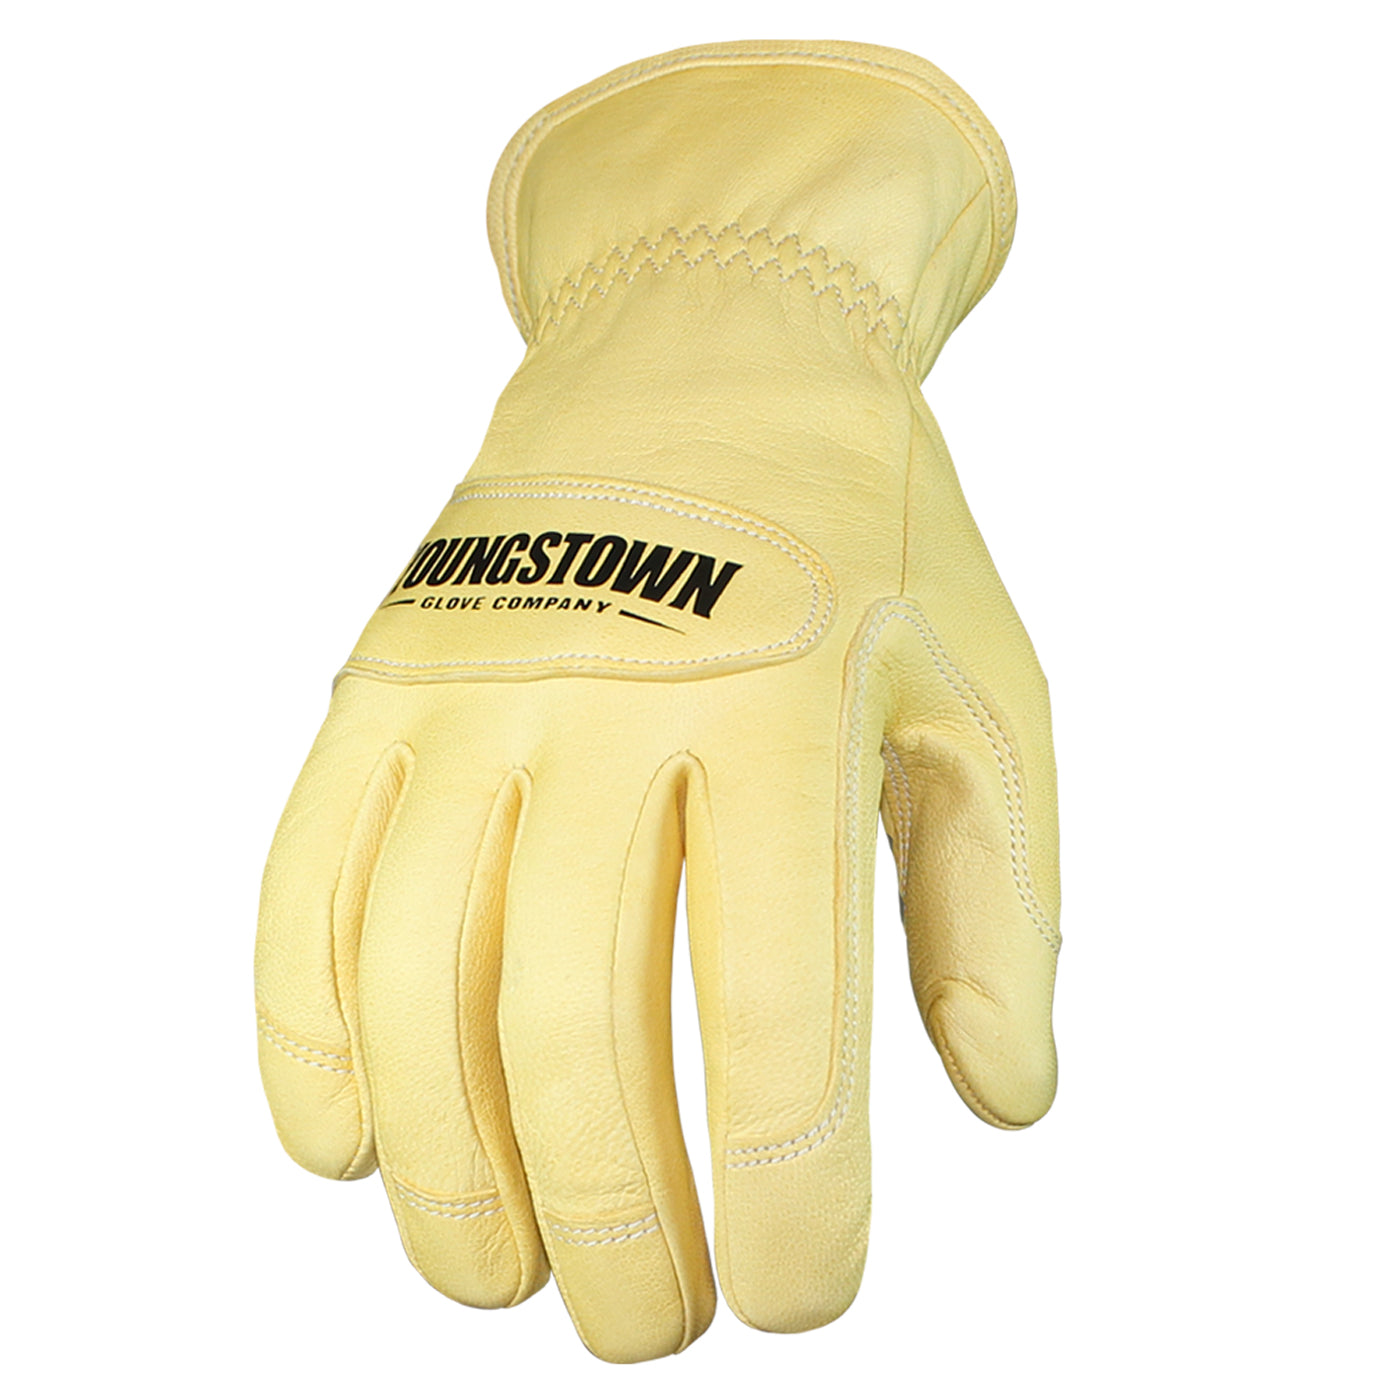 12-3265-60 Youngstown Ground Glove - Main image